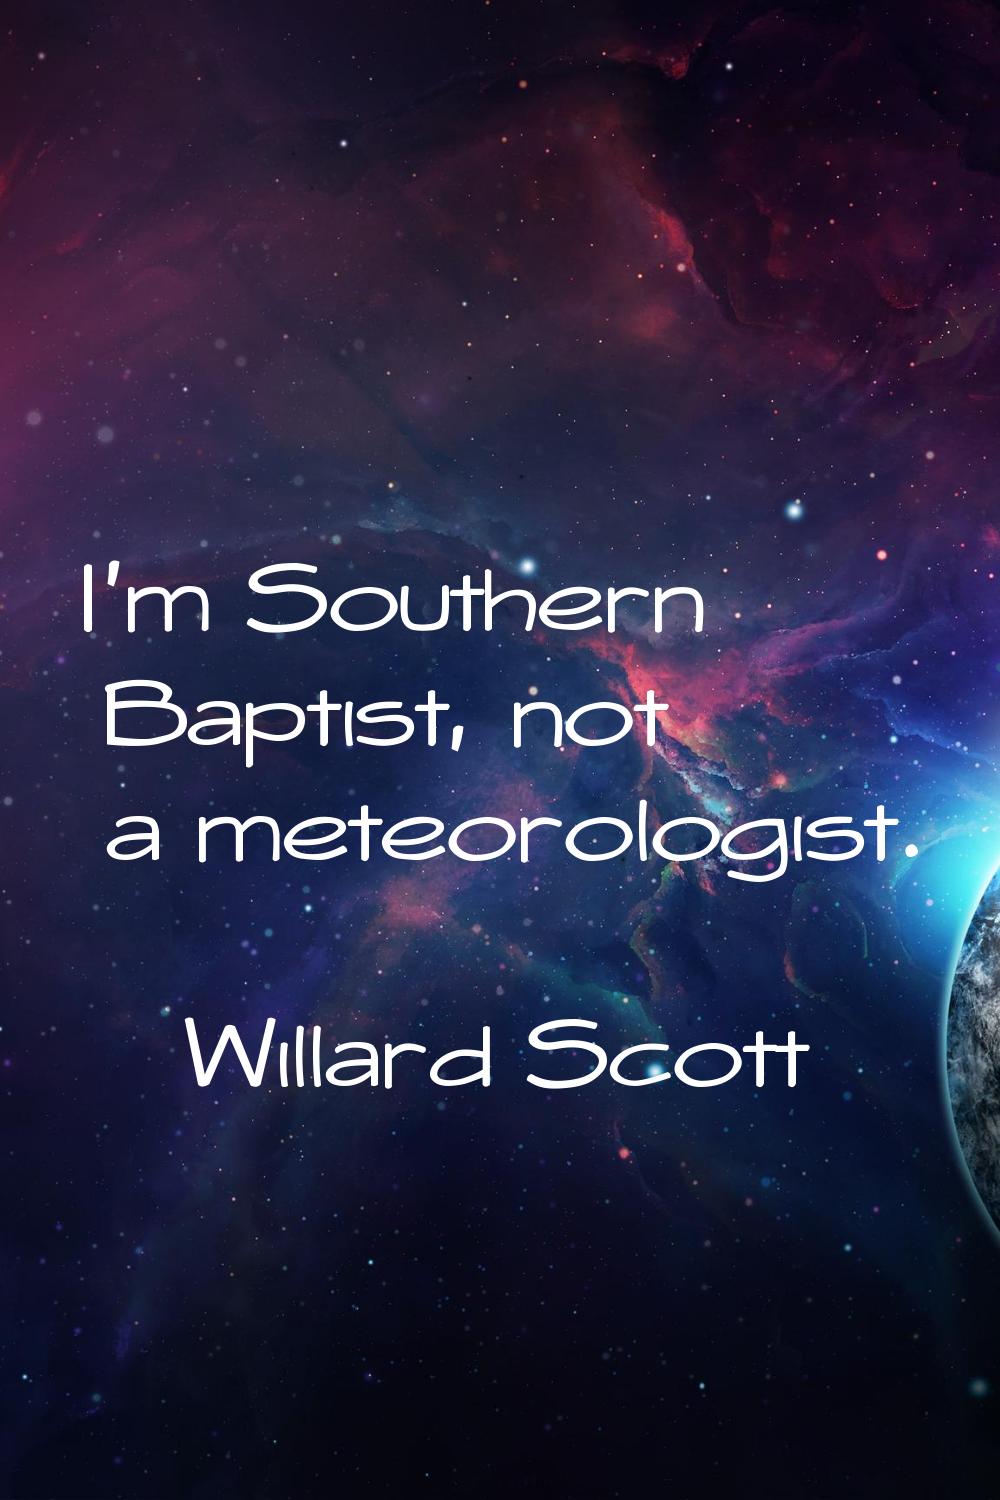 I'm Southern Baptist, not a meteorologist.